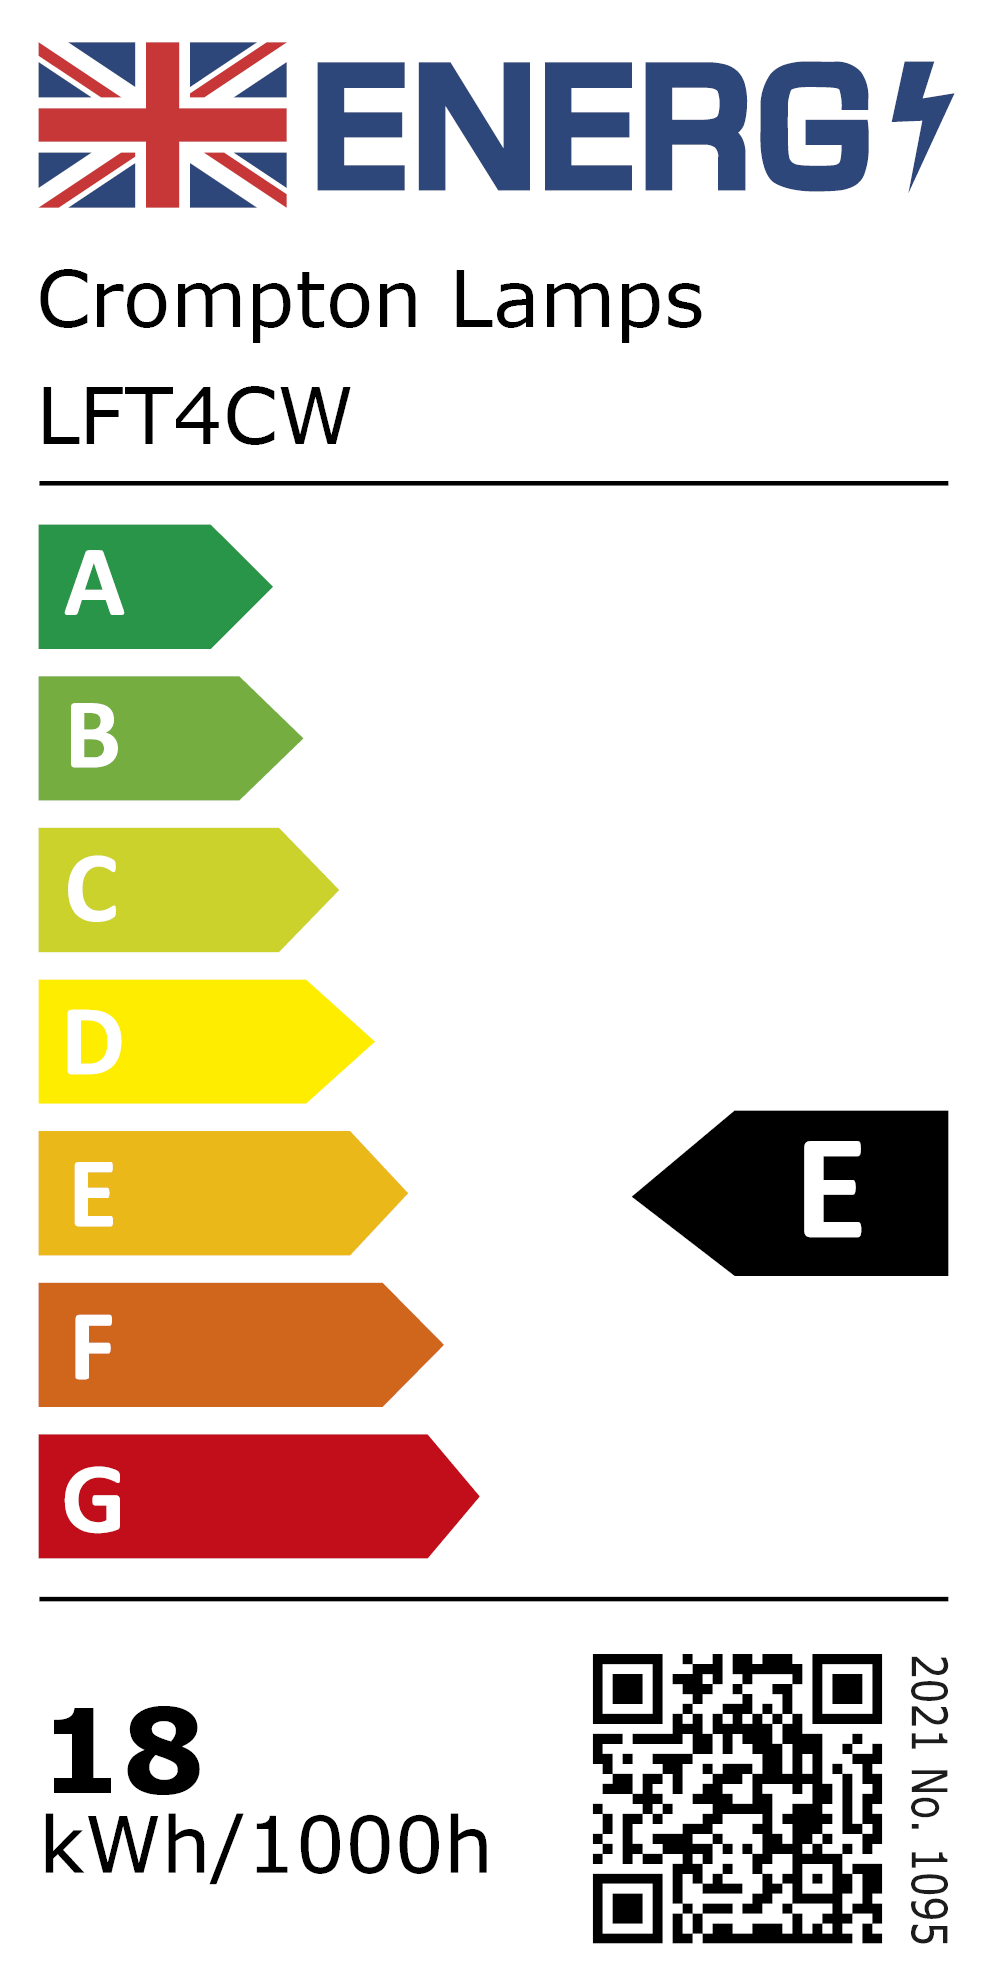 New 2021 Energy Rating Label: Stock Code LFT4CW